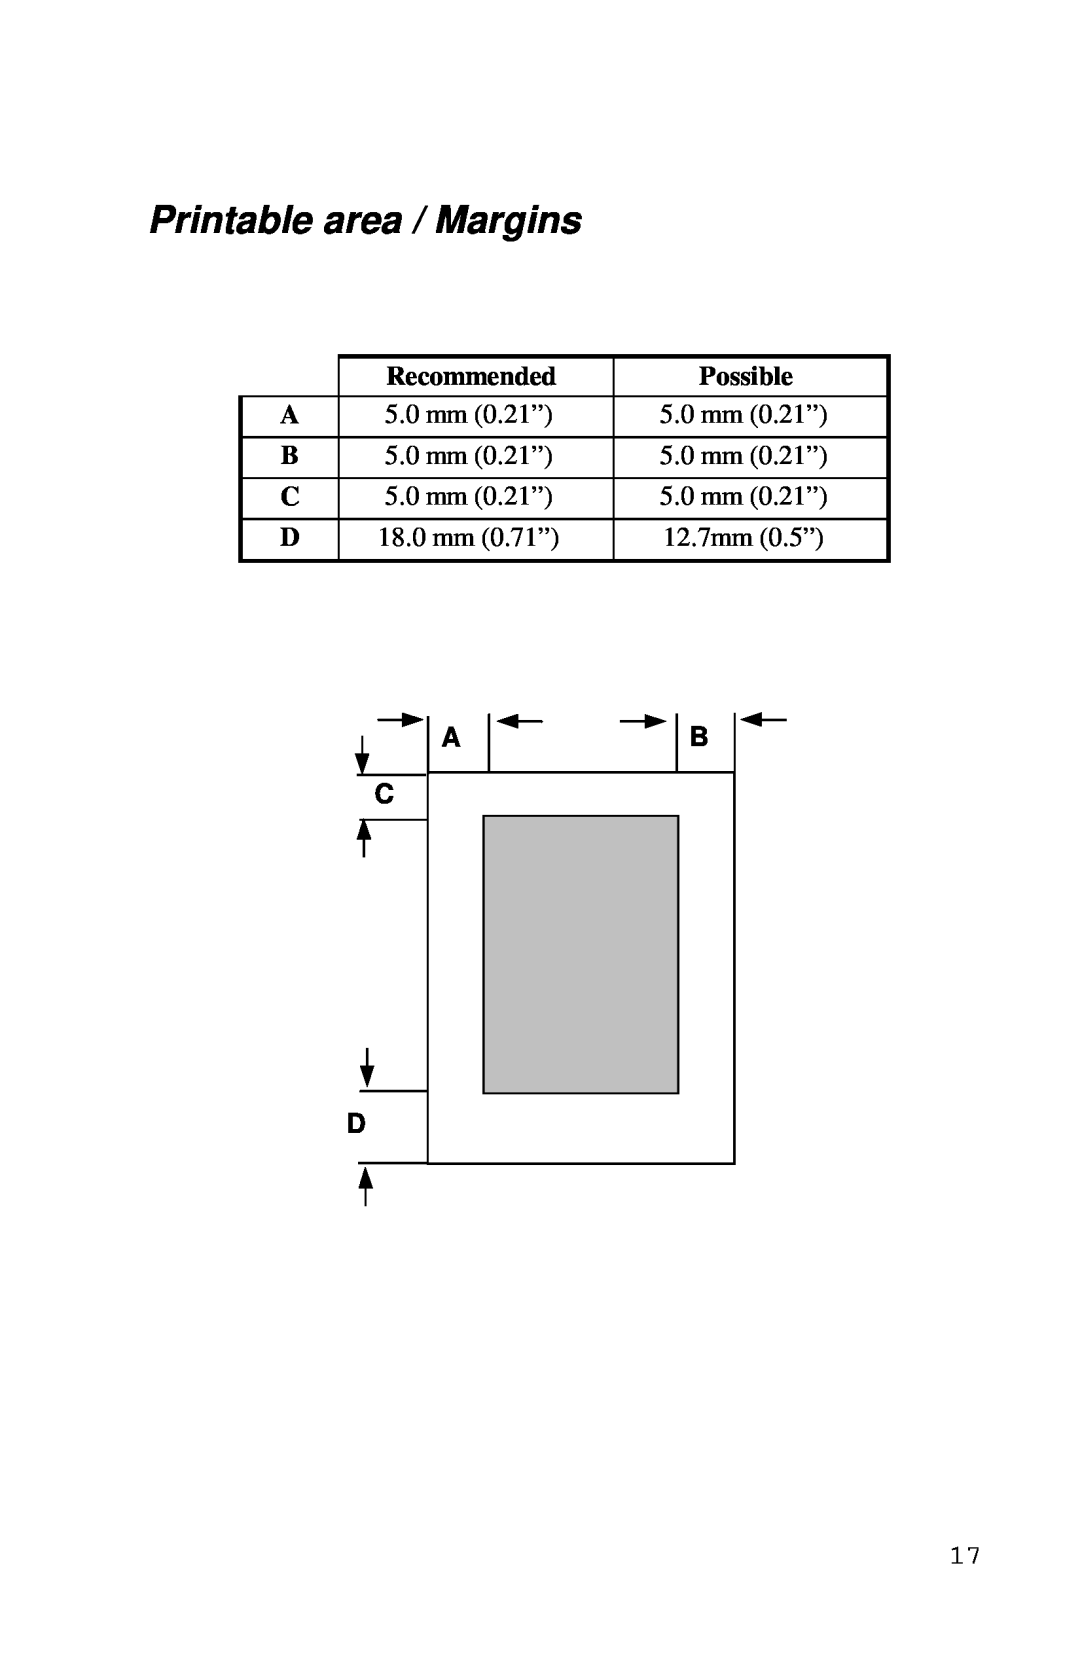 Xerox Inkjet Printer manual Printable area / Margins, Recommended, Possible, Ab C D 